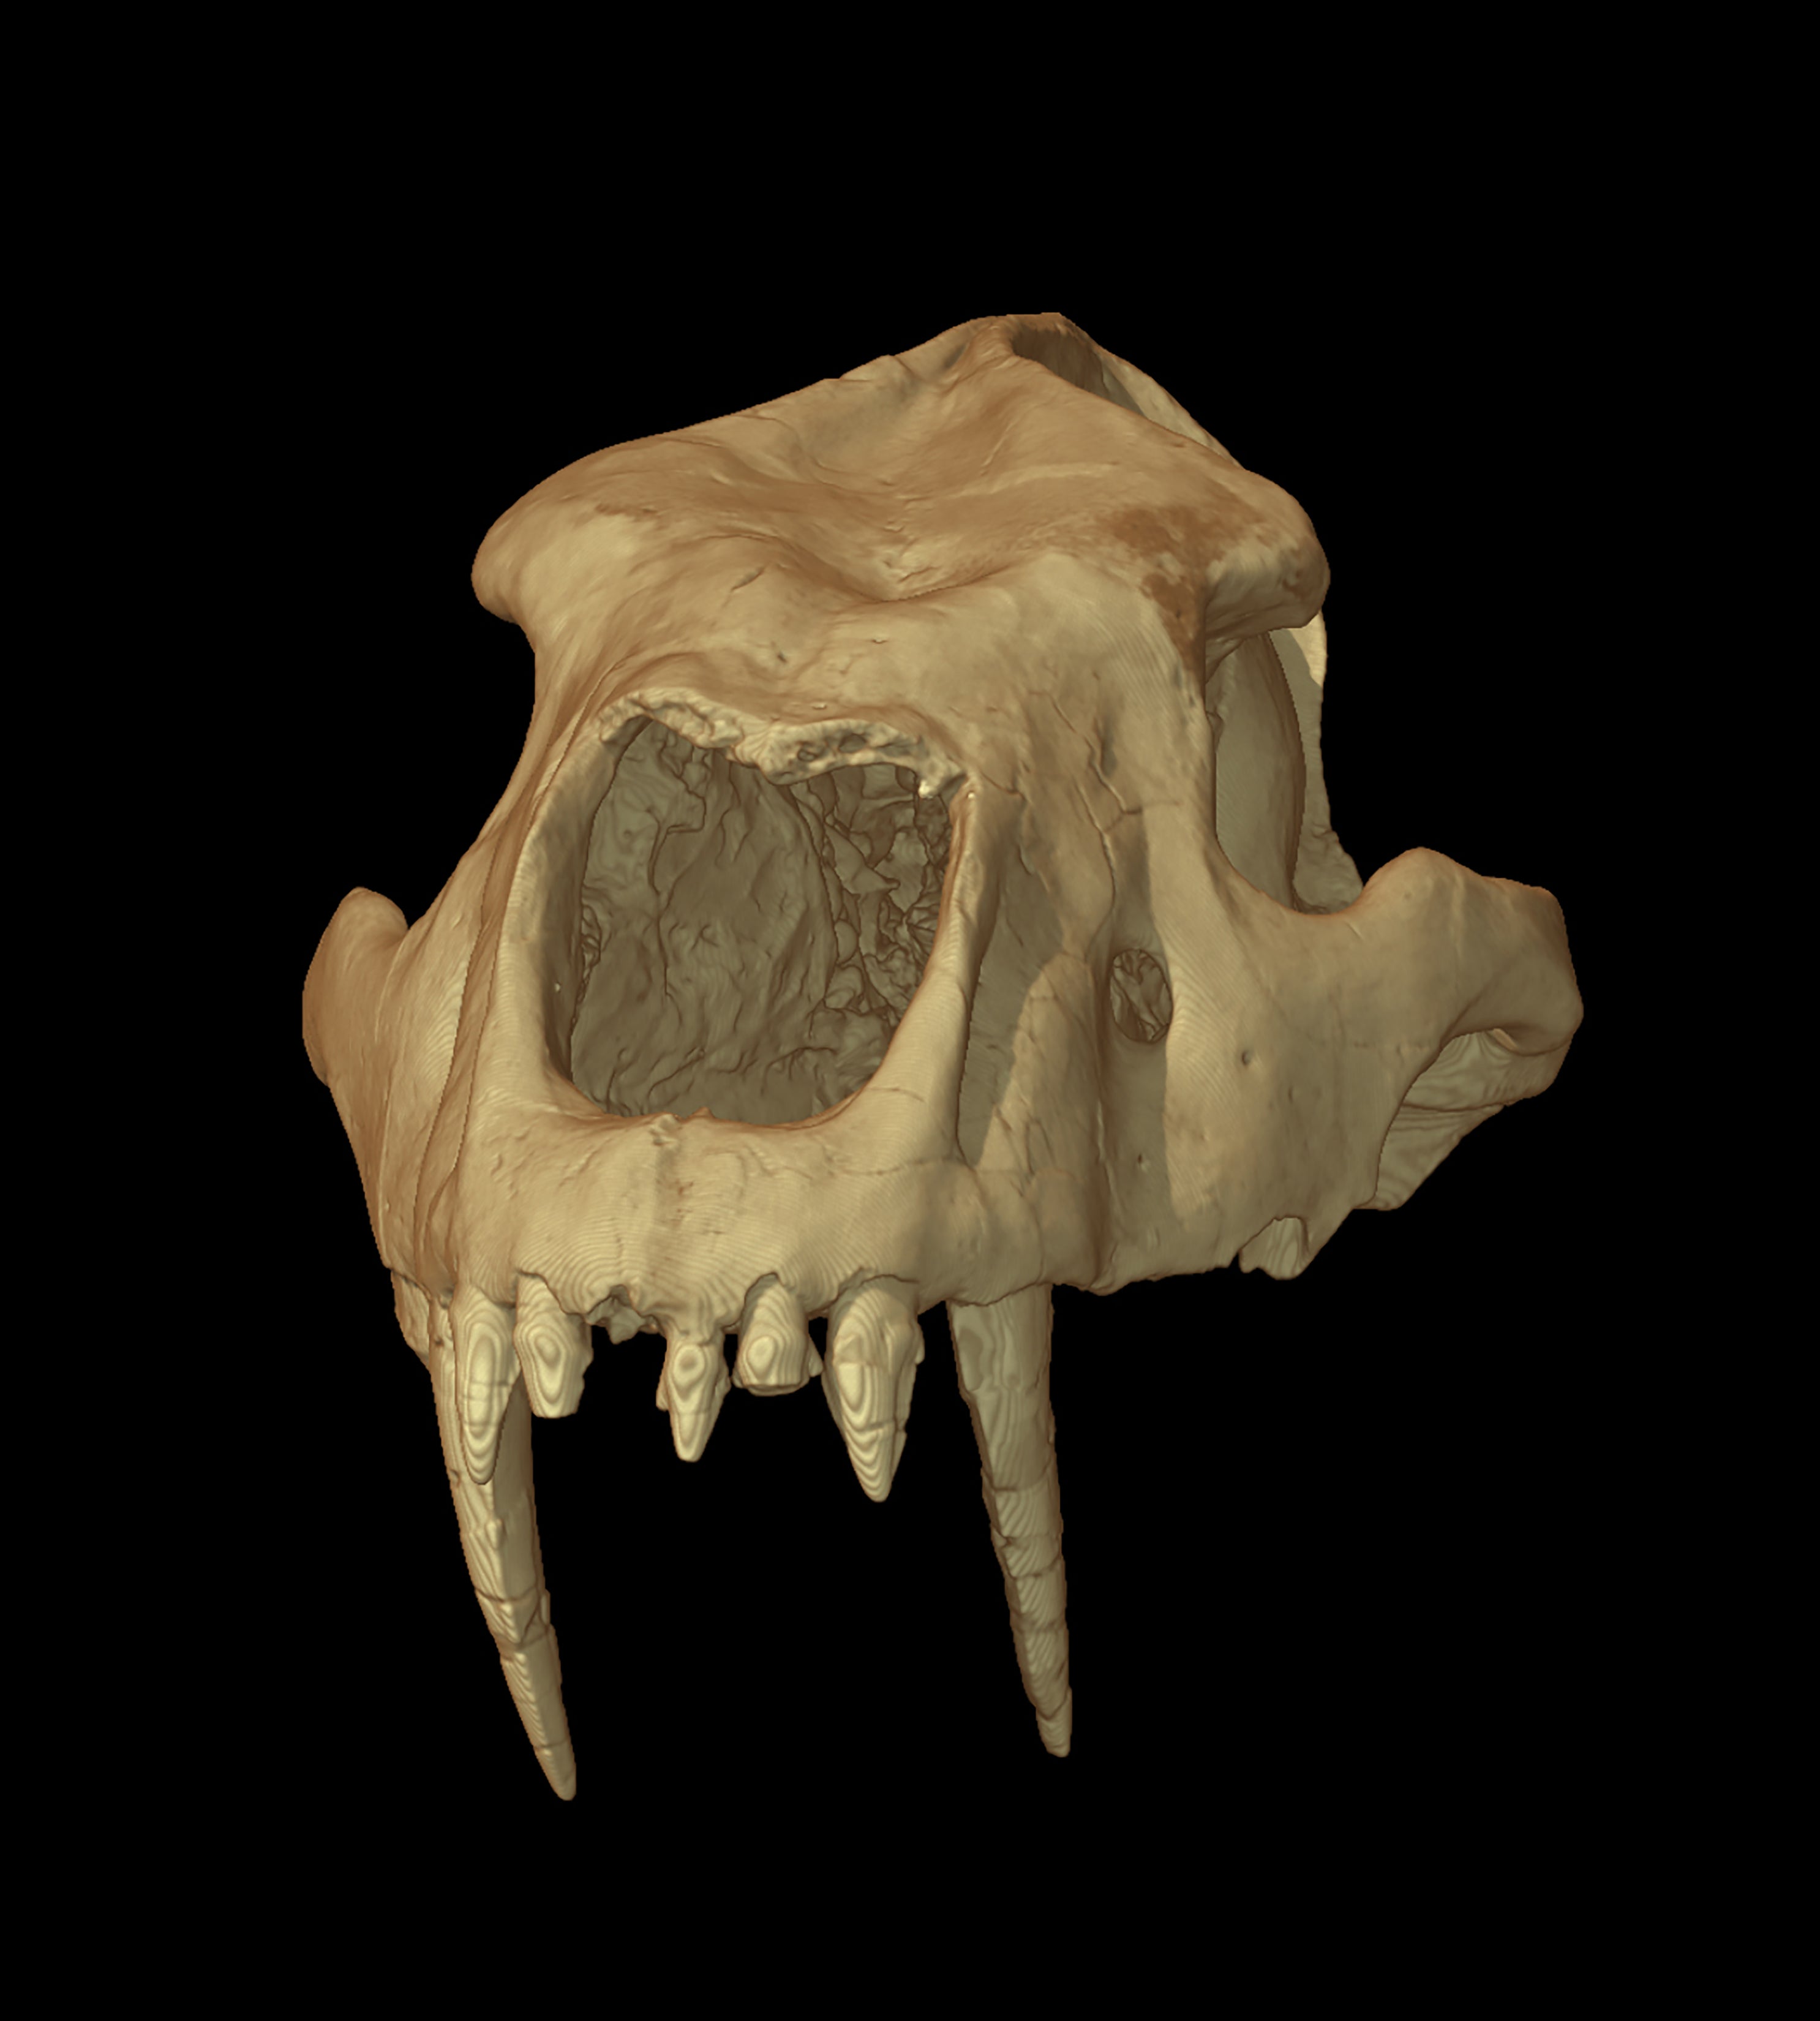 A rendering from a 3D analysis of Homotherium teeth